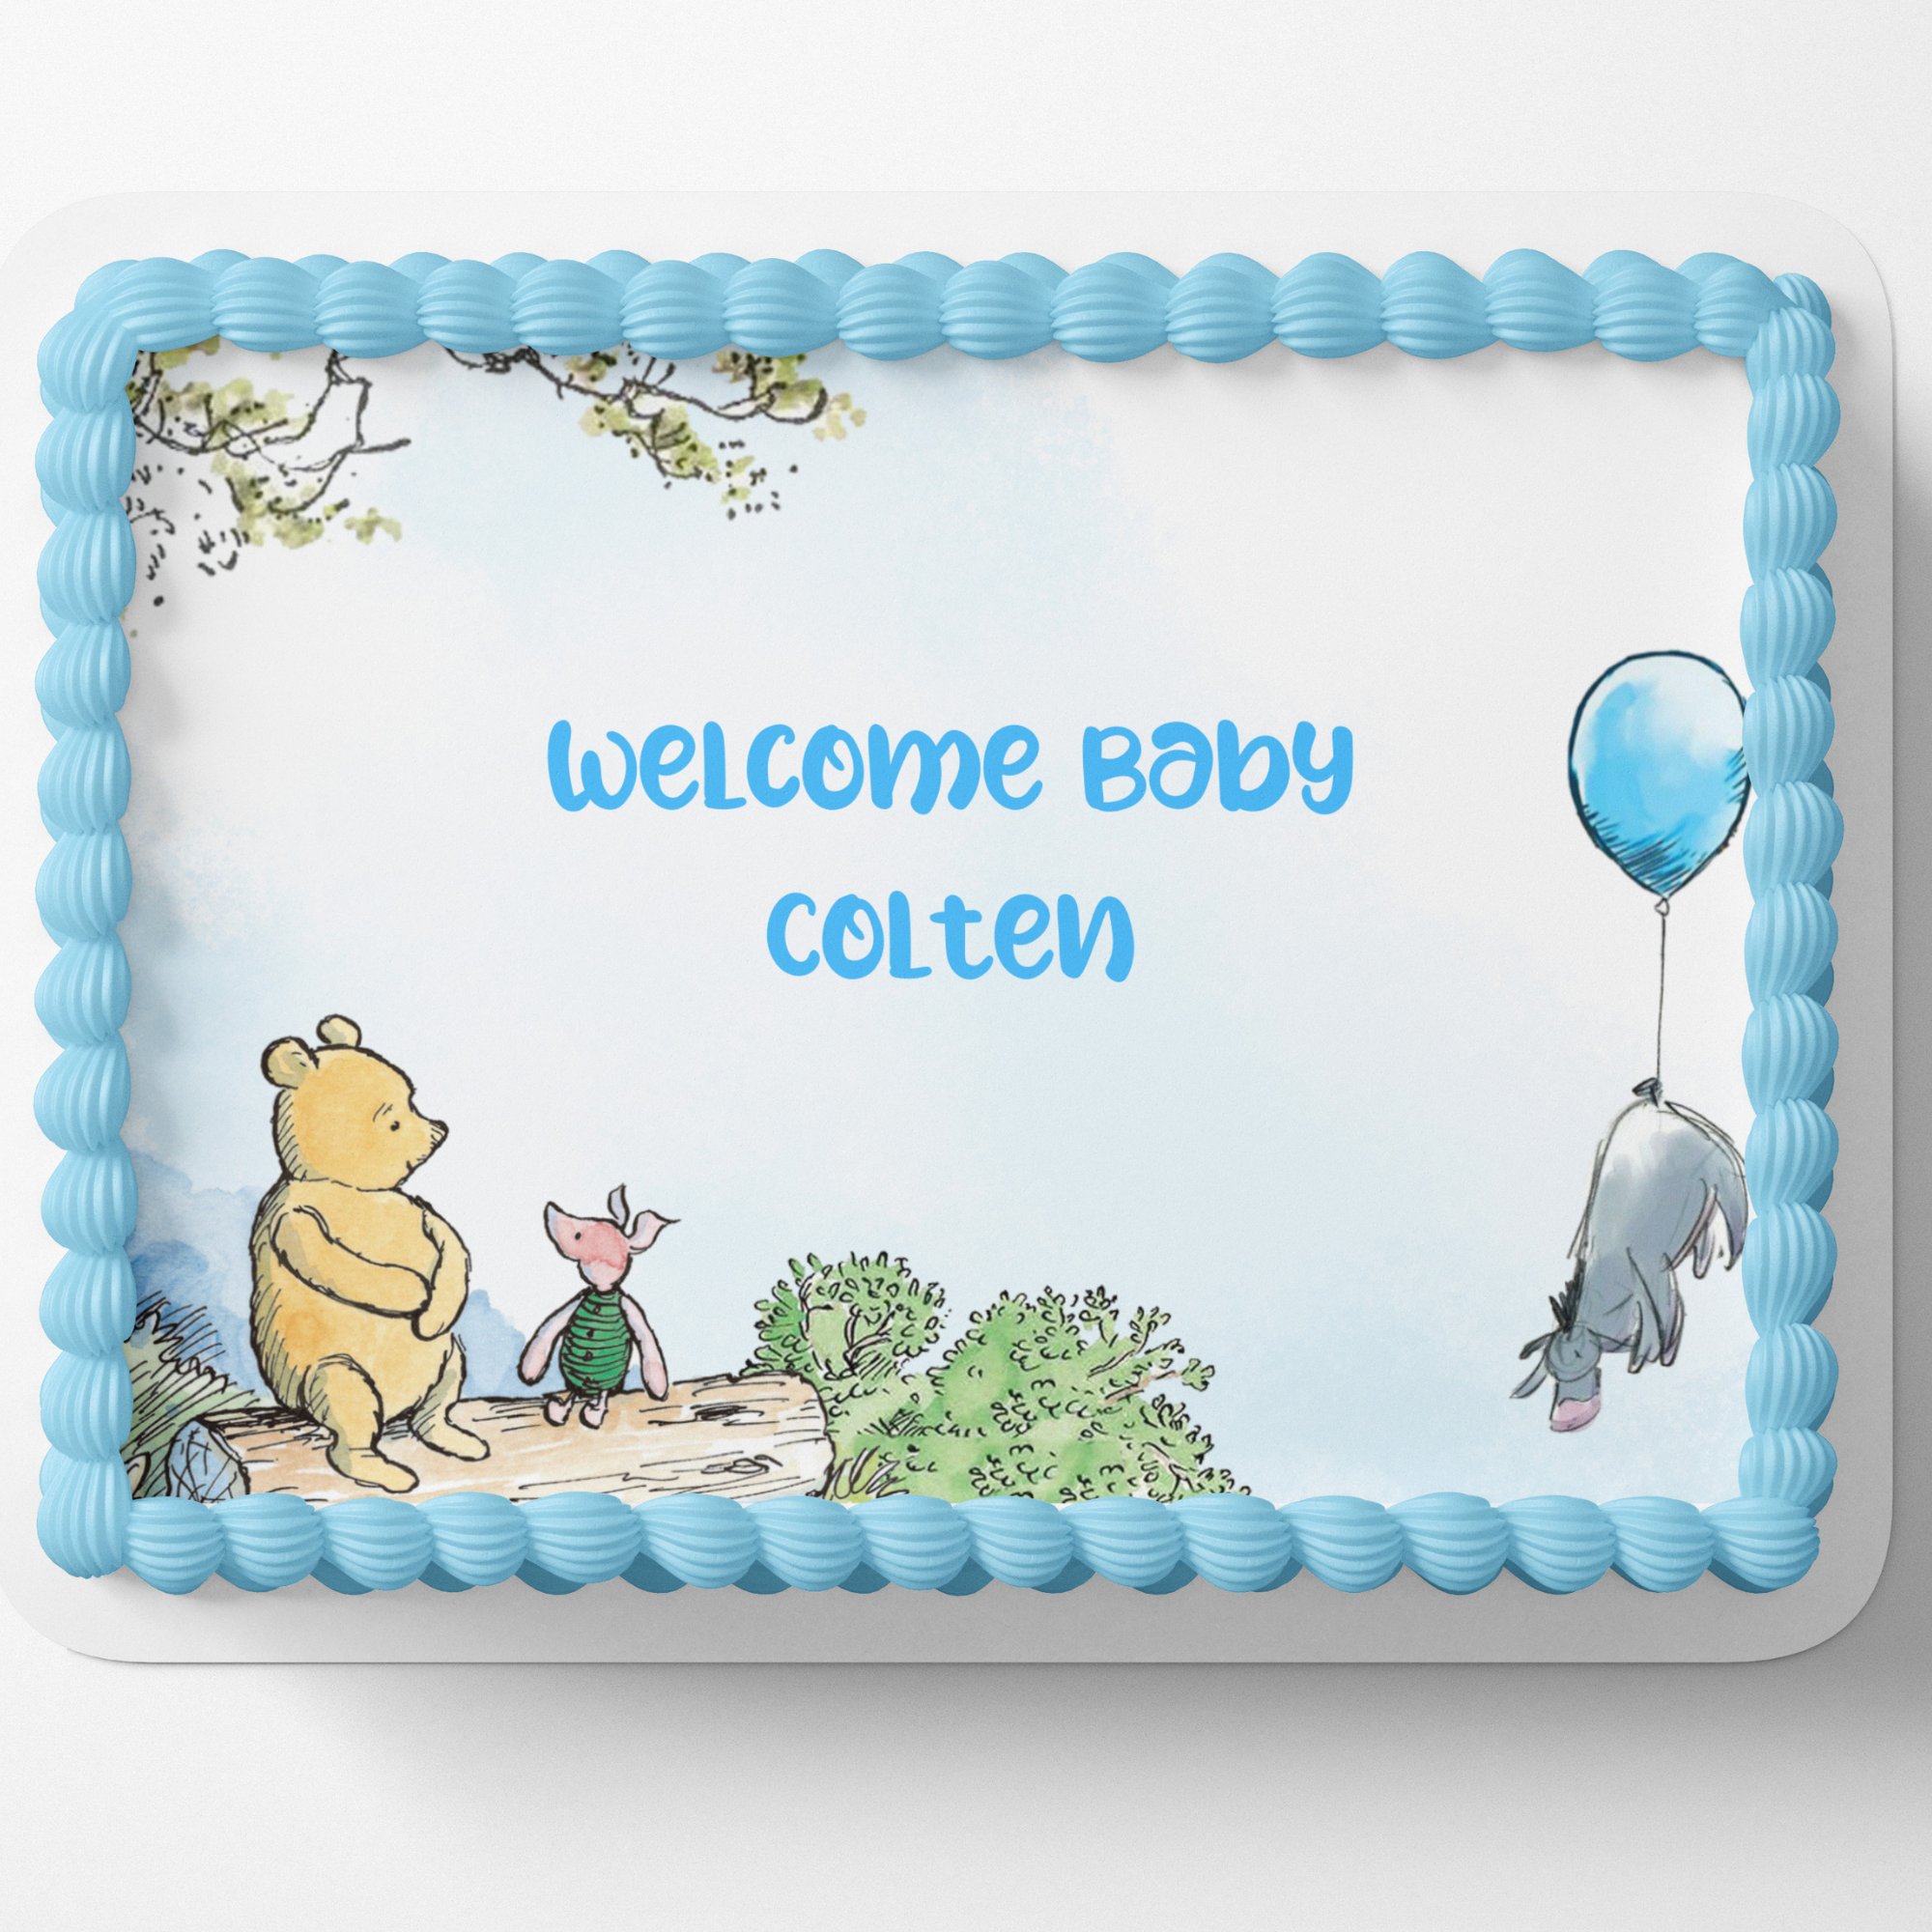 Cake Topper - Winnie the Pooh Welcome Baby